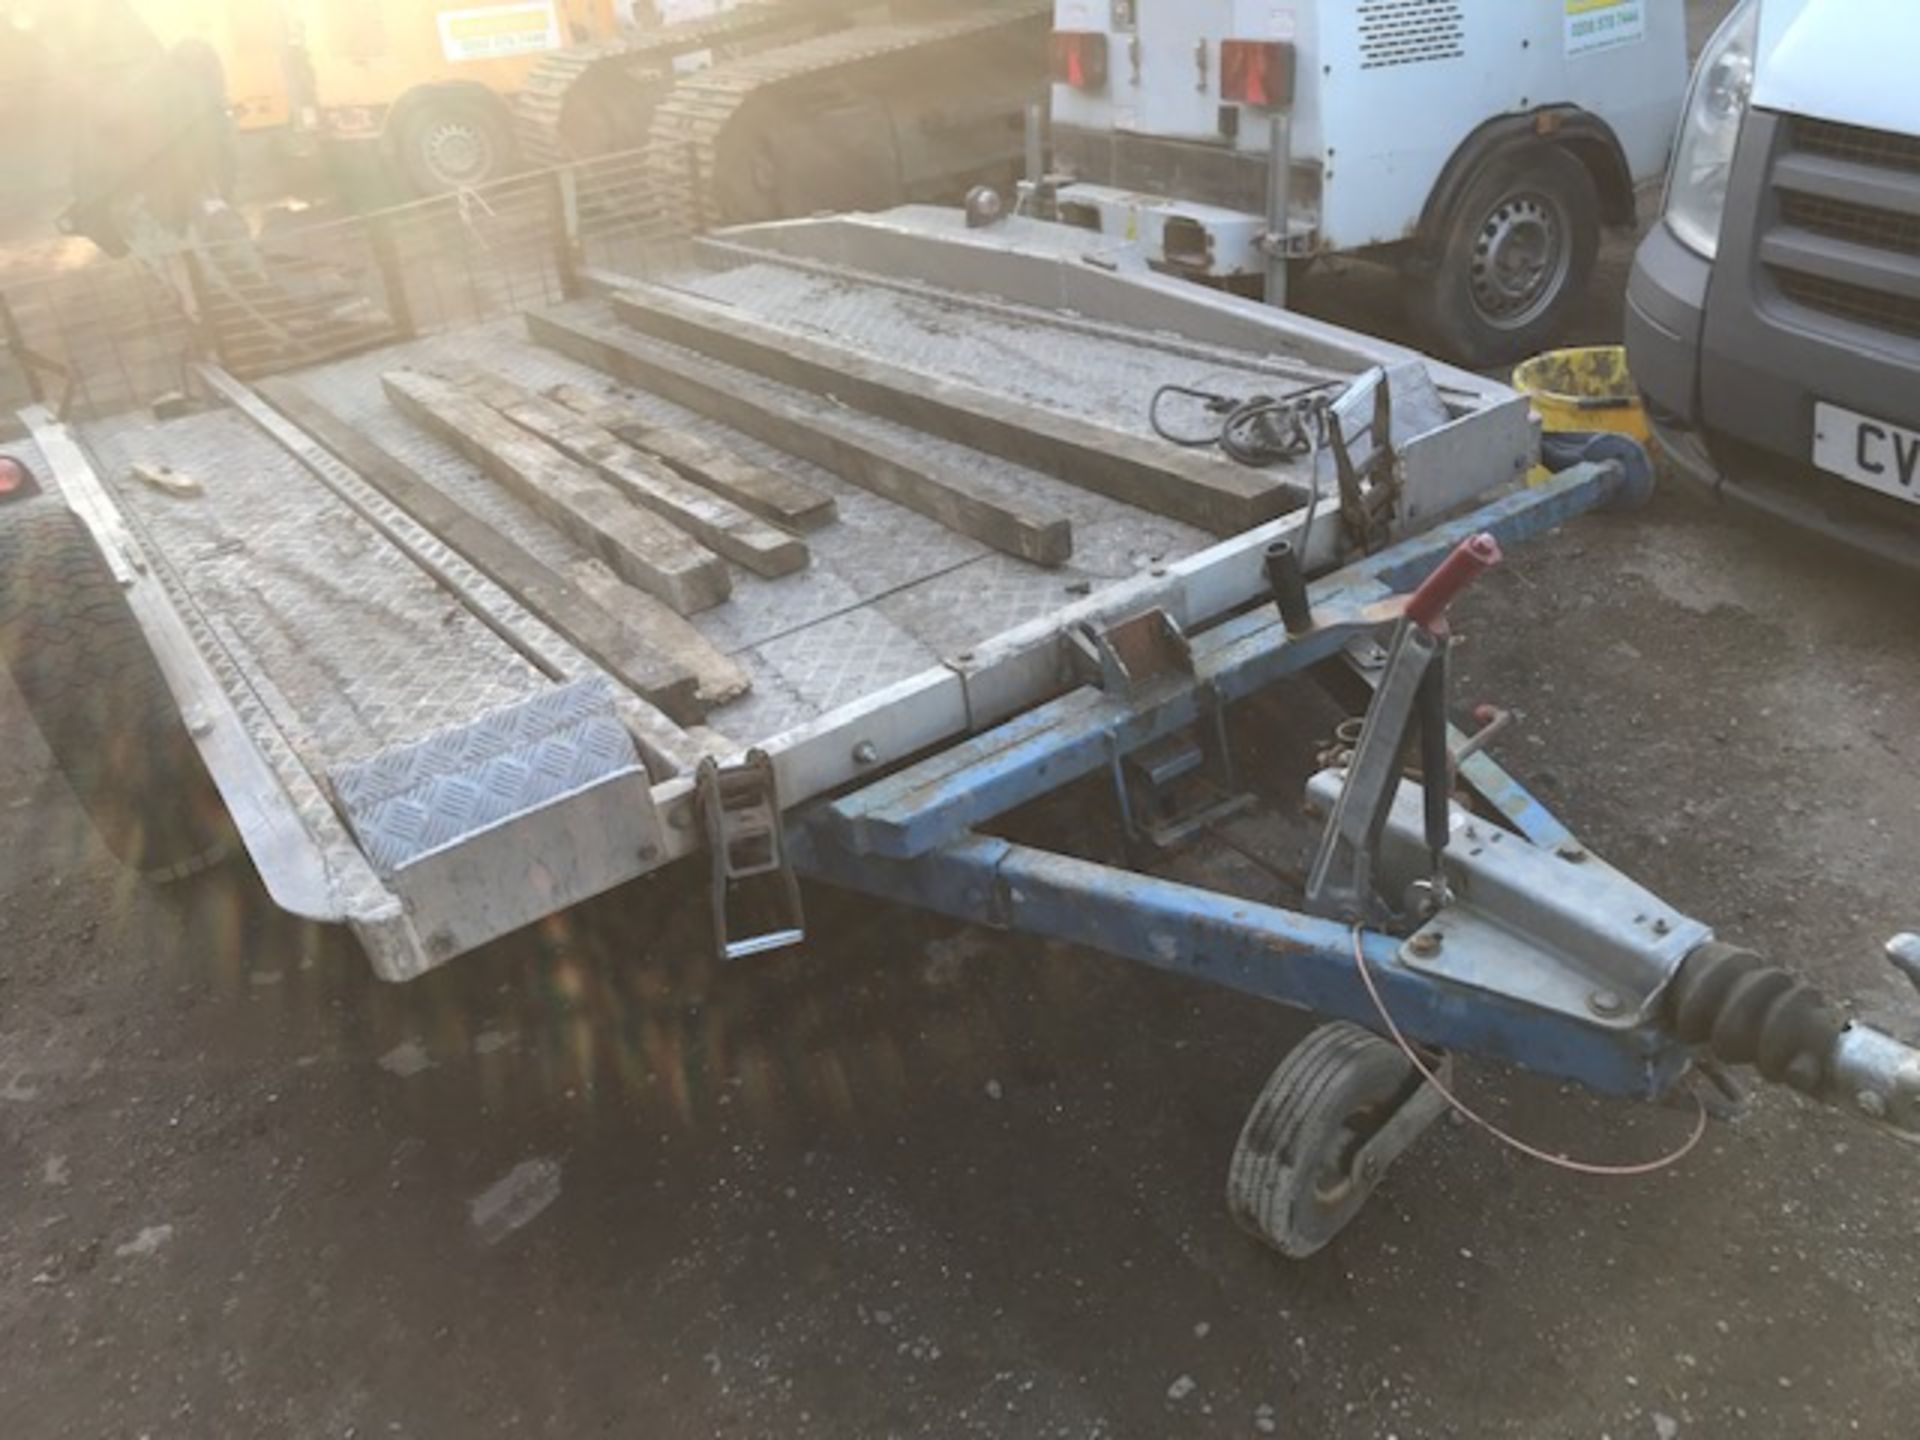 HEAVY DUTY TWIN AXLED PLANT TRAILER, IDEAL FOR GENERATORS ETC...ALUMINIUM CHEQUER PLATE FLOOR - Image 3 of 3